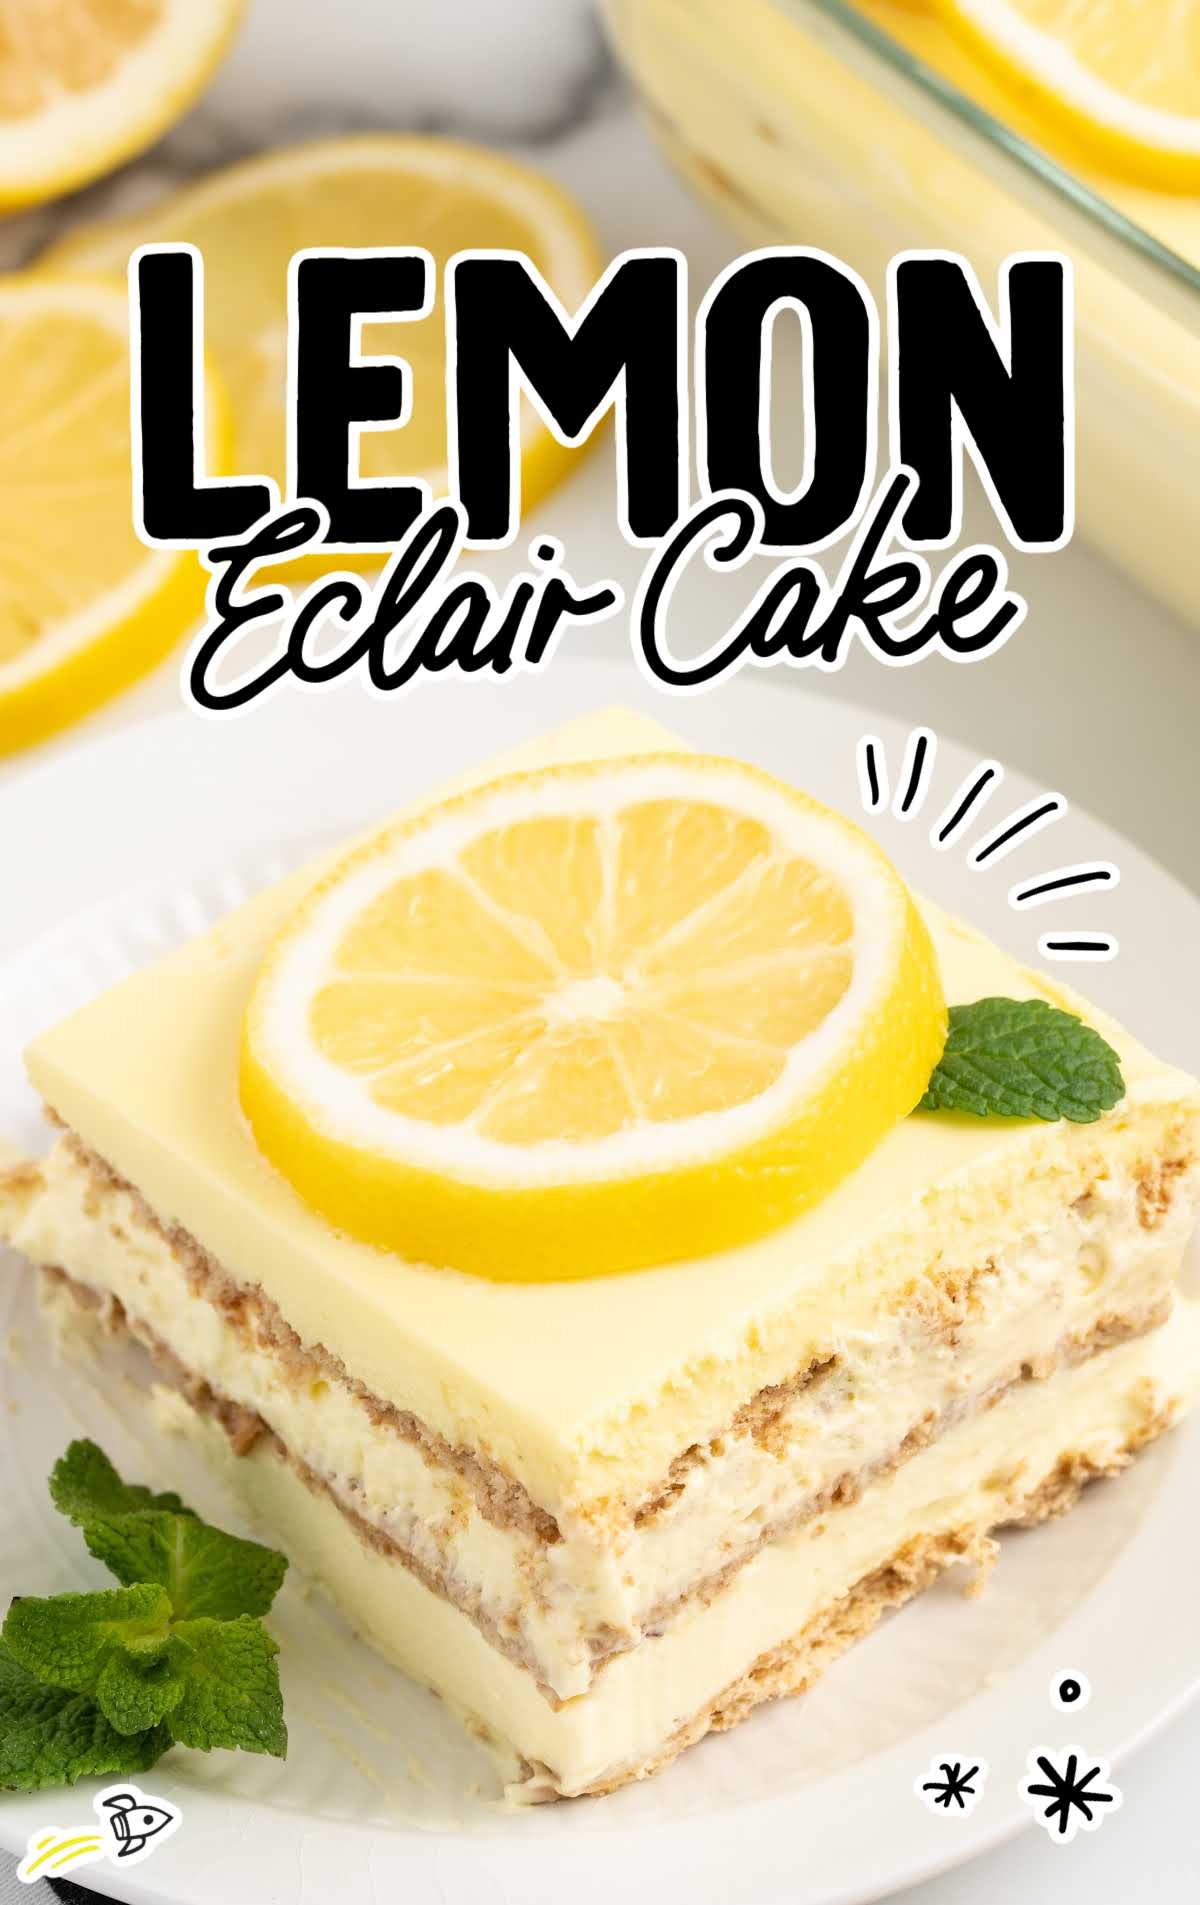 a close up shot of a slice of Lemon Eclair Cake on a plate topped with a sliced lemon